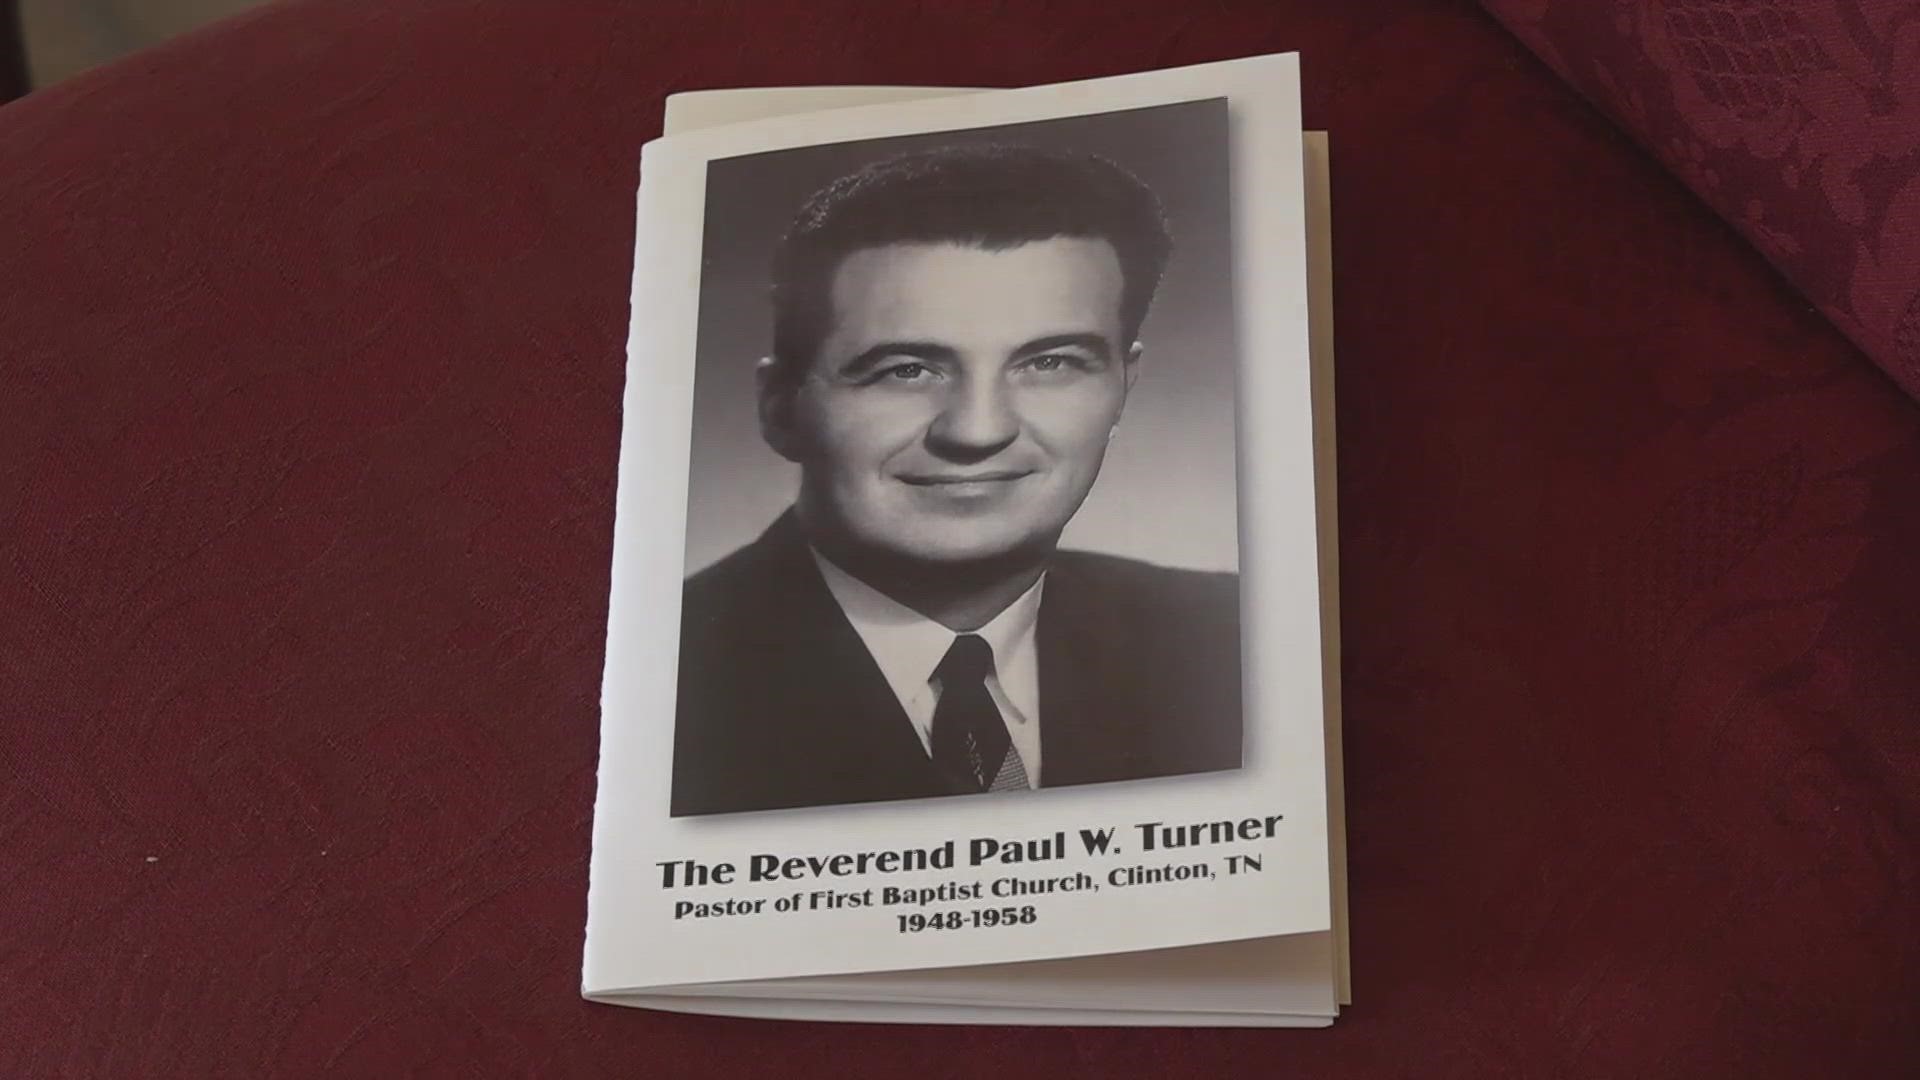 The First Baptist Church in Clinton honored Reverend Paul Turner for his role in the Clinton 12.